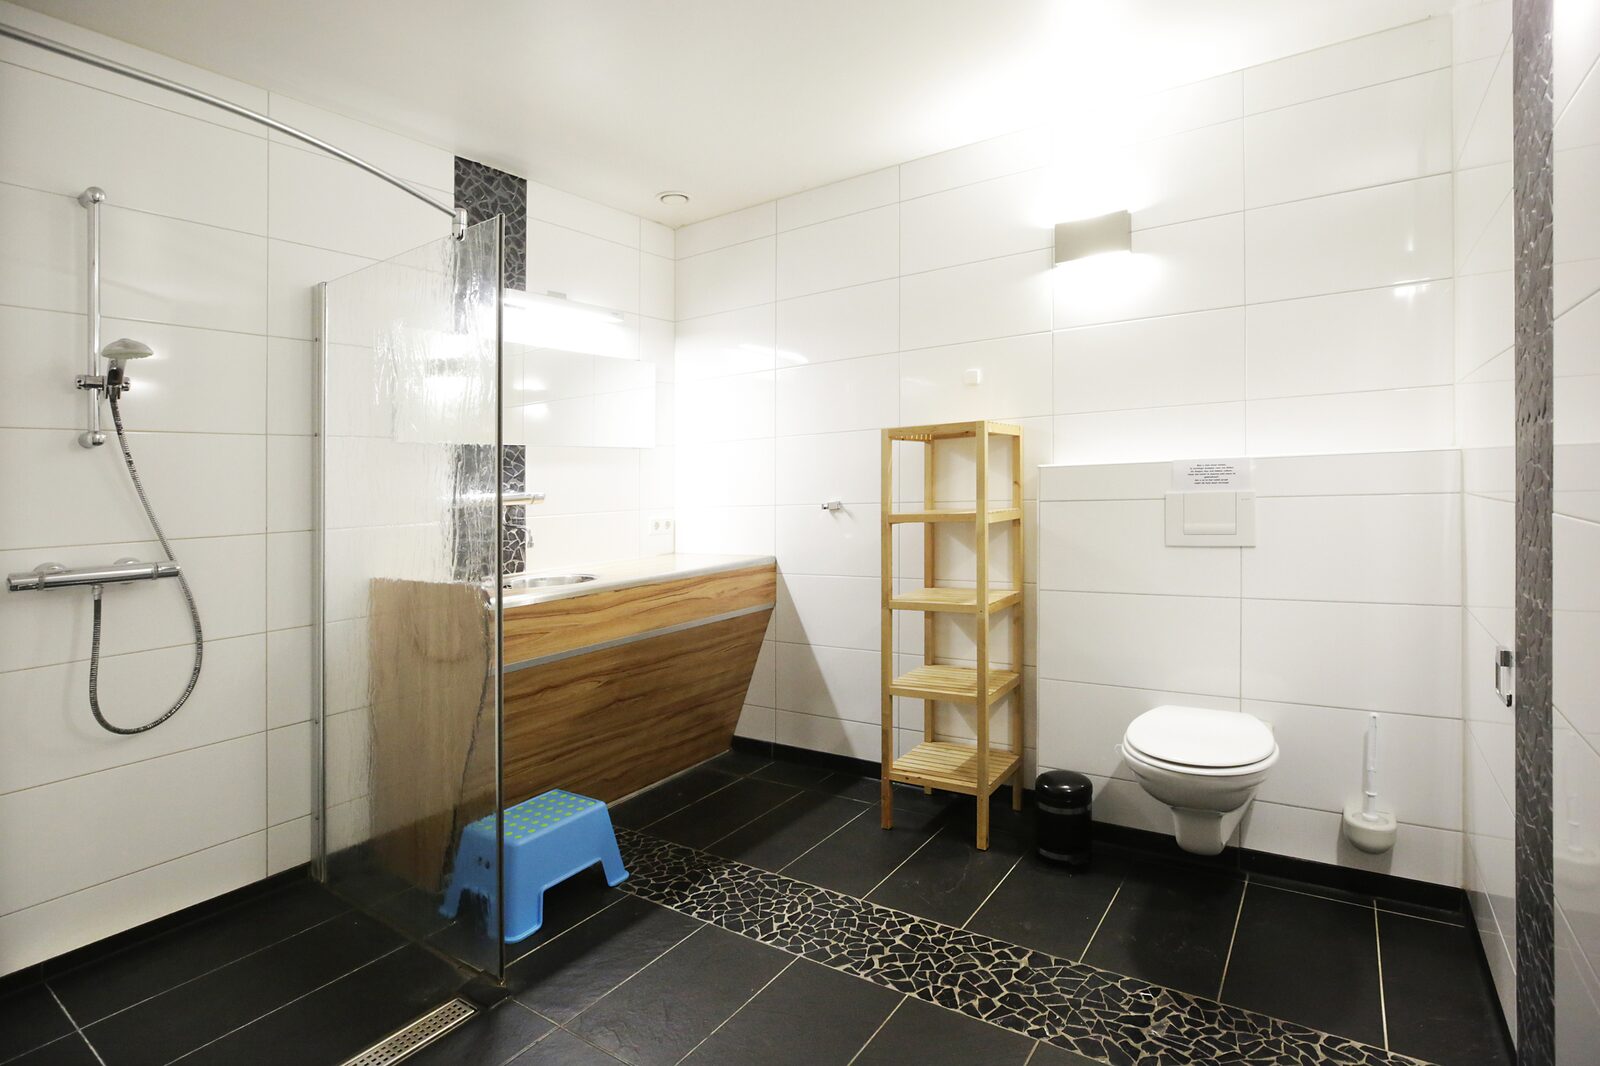 Pitch with private sanitary cabin with shower, sink and toilet